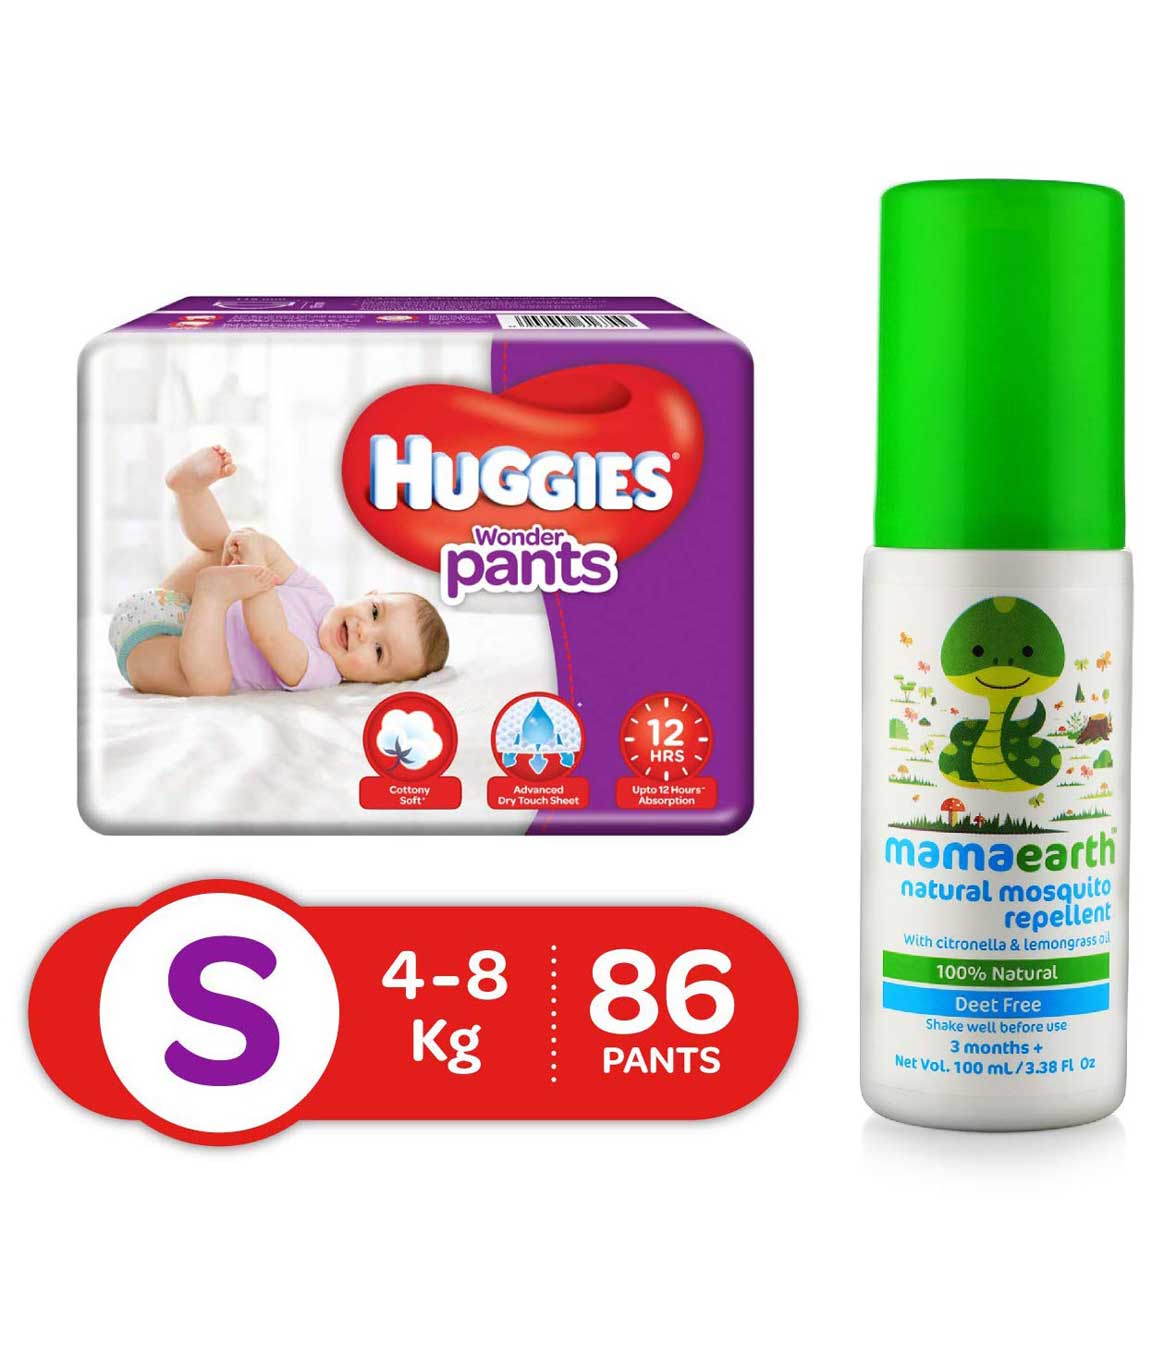 Huggies Wonder Pants Small Size Diapers, 86 Count & Mamaearth Natural Insect Repellent for babies (100 ml)